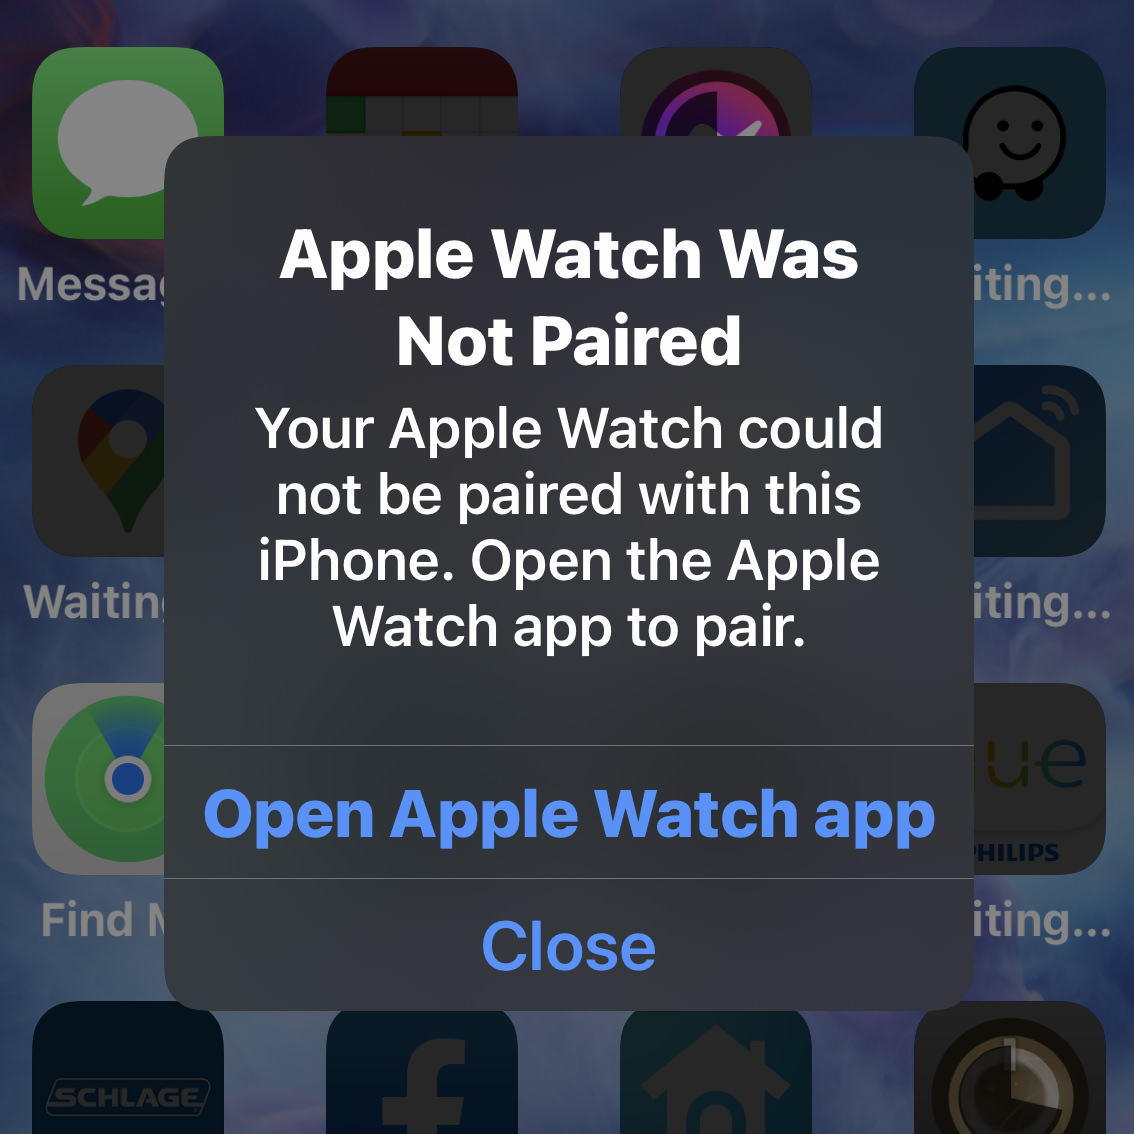 iPhone says that Apple Watch was not paired! OH NOES!